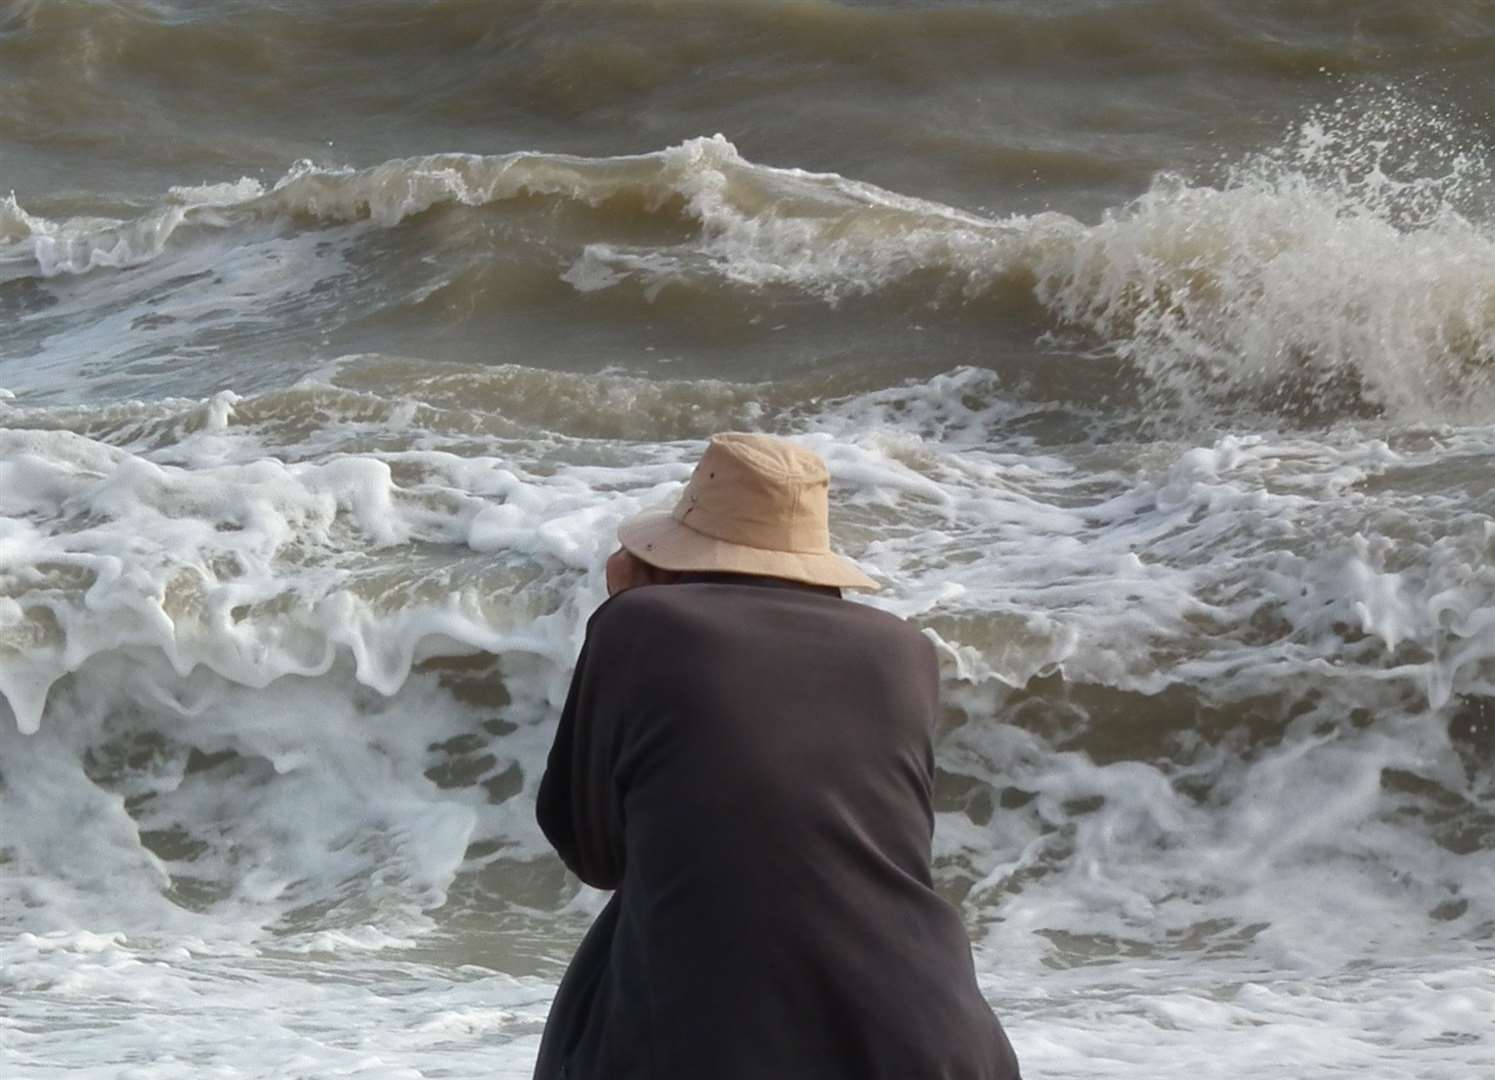 His wife said Harold really liked this picture of the stormy sea because it shows him right in the middle of the action